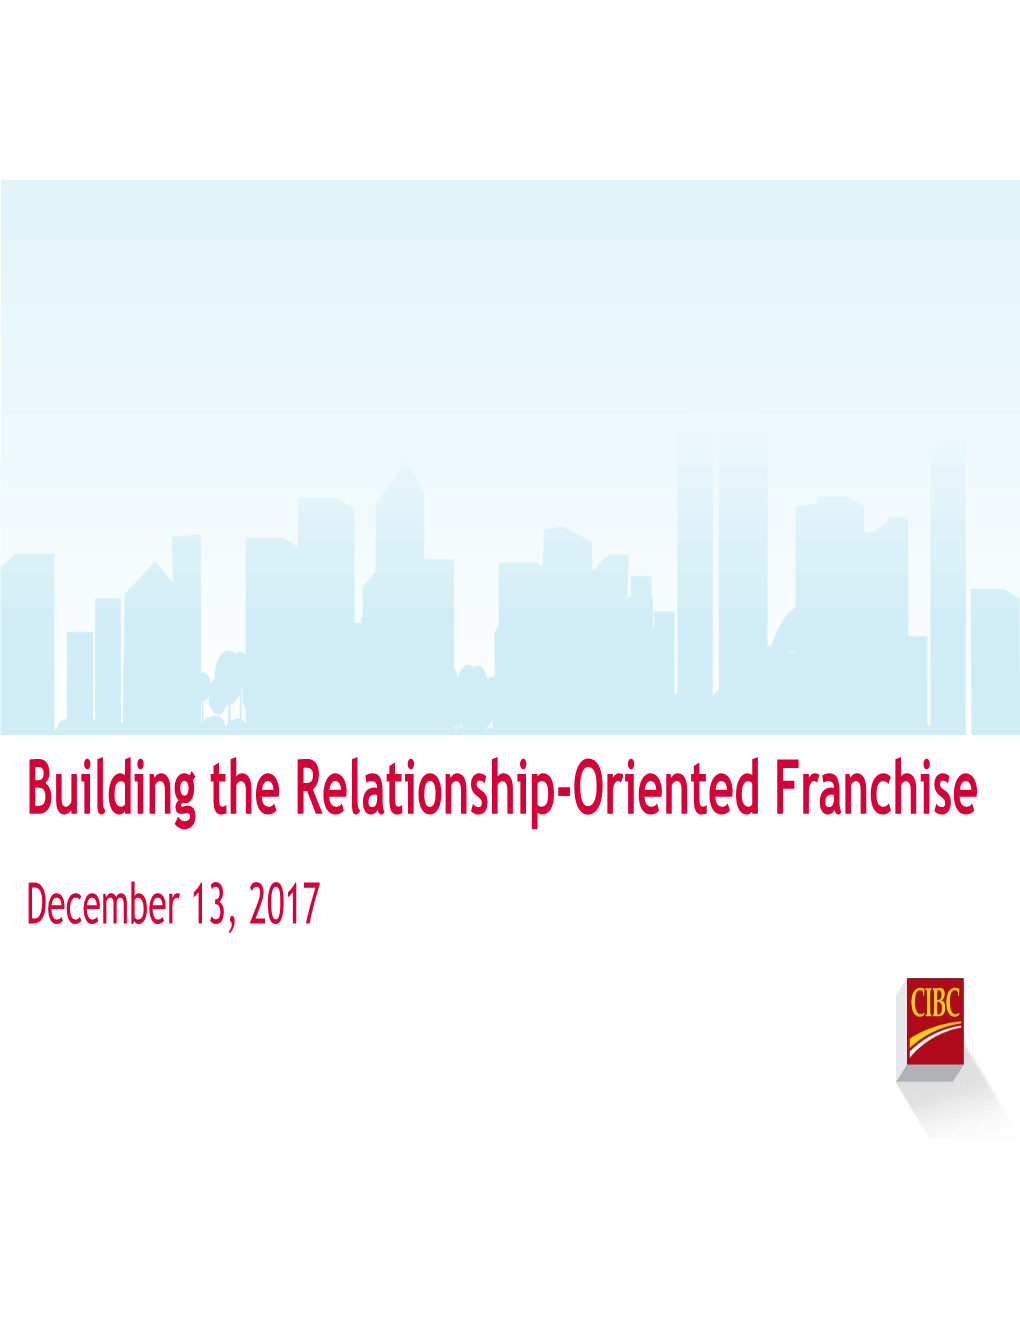 Building the Relationship-Oriented Franchise December 13, 2017 1 Forward Looking Statements